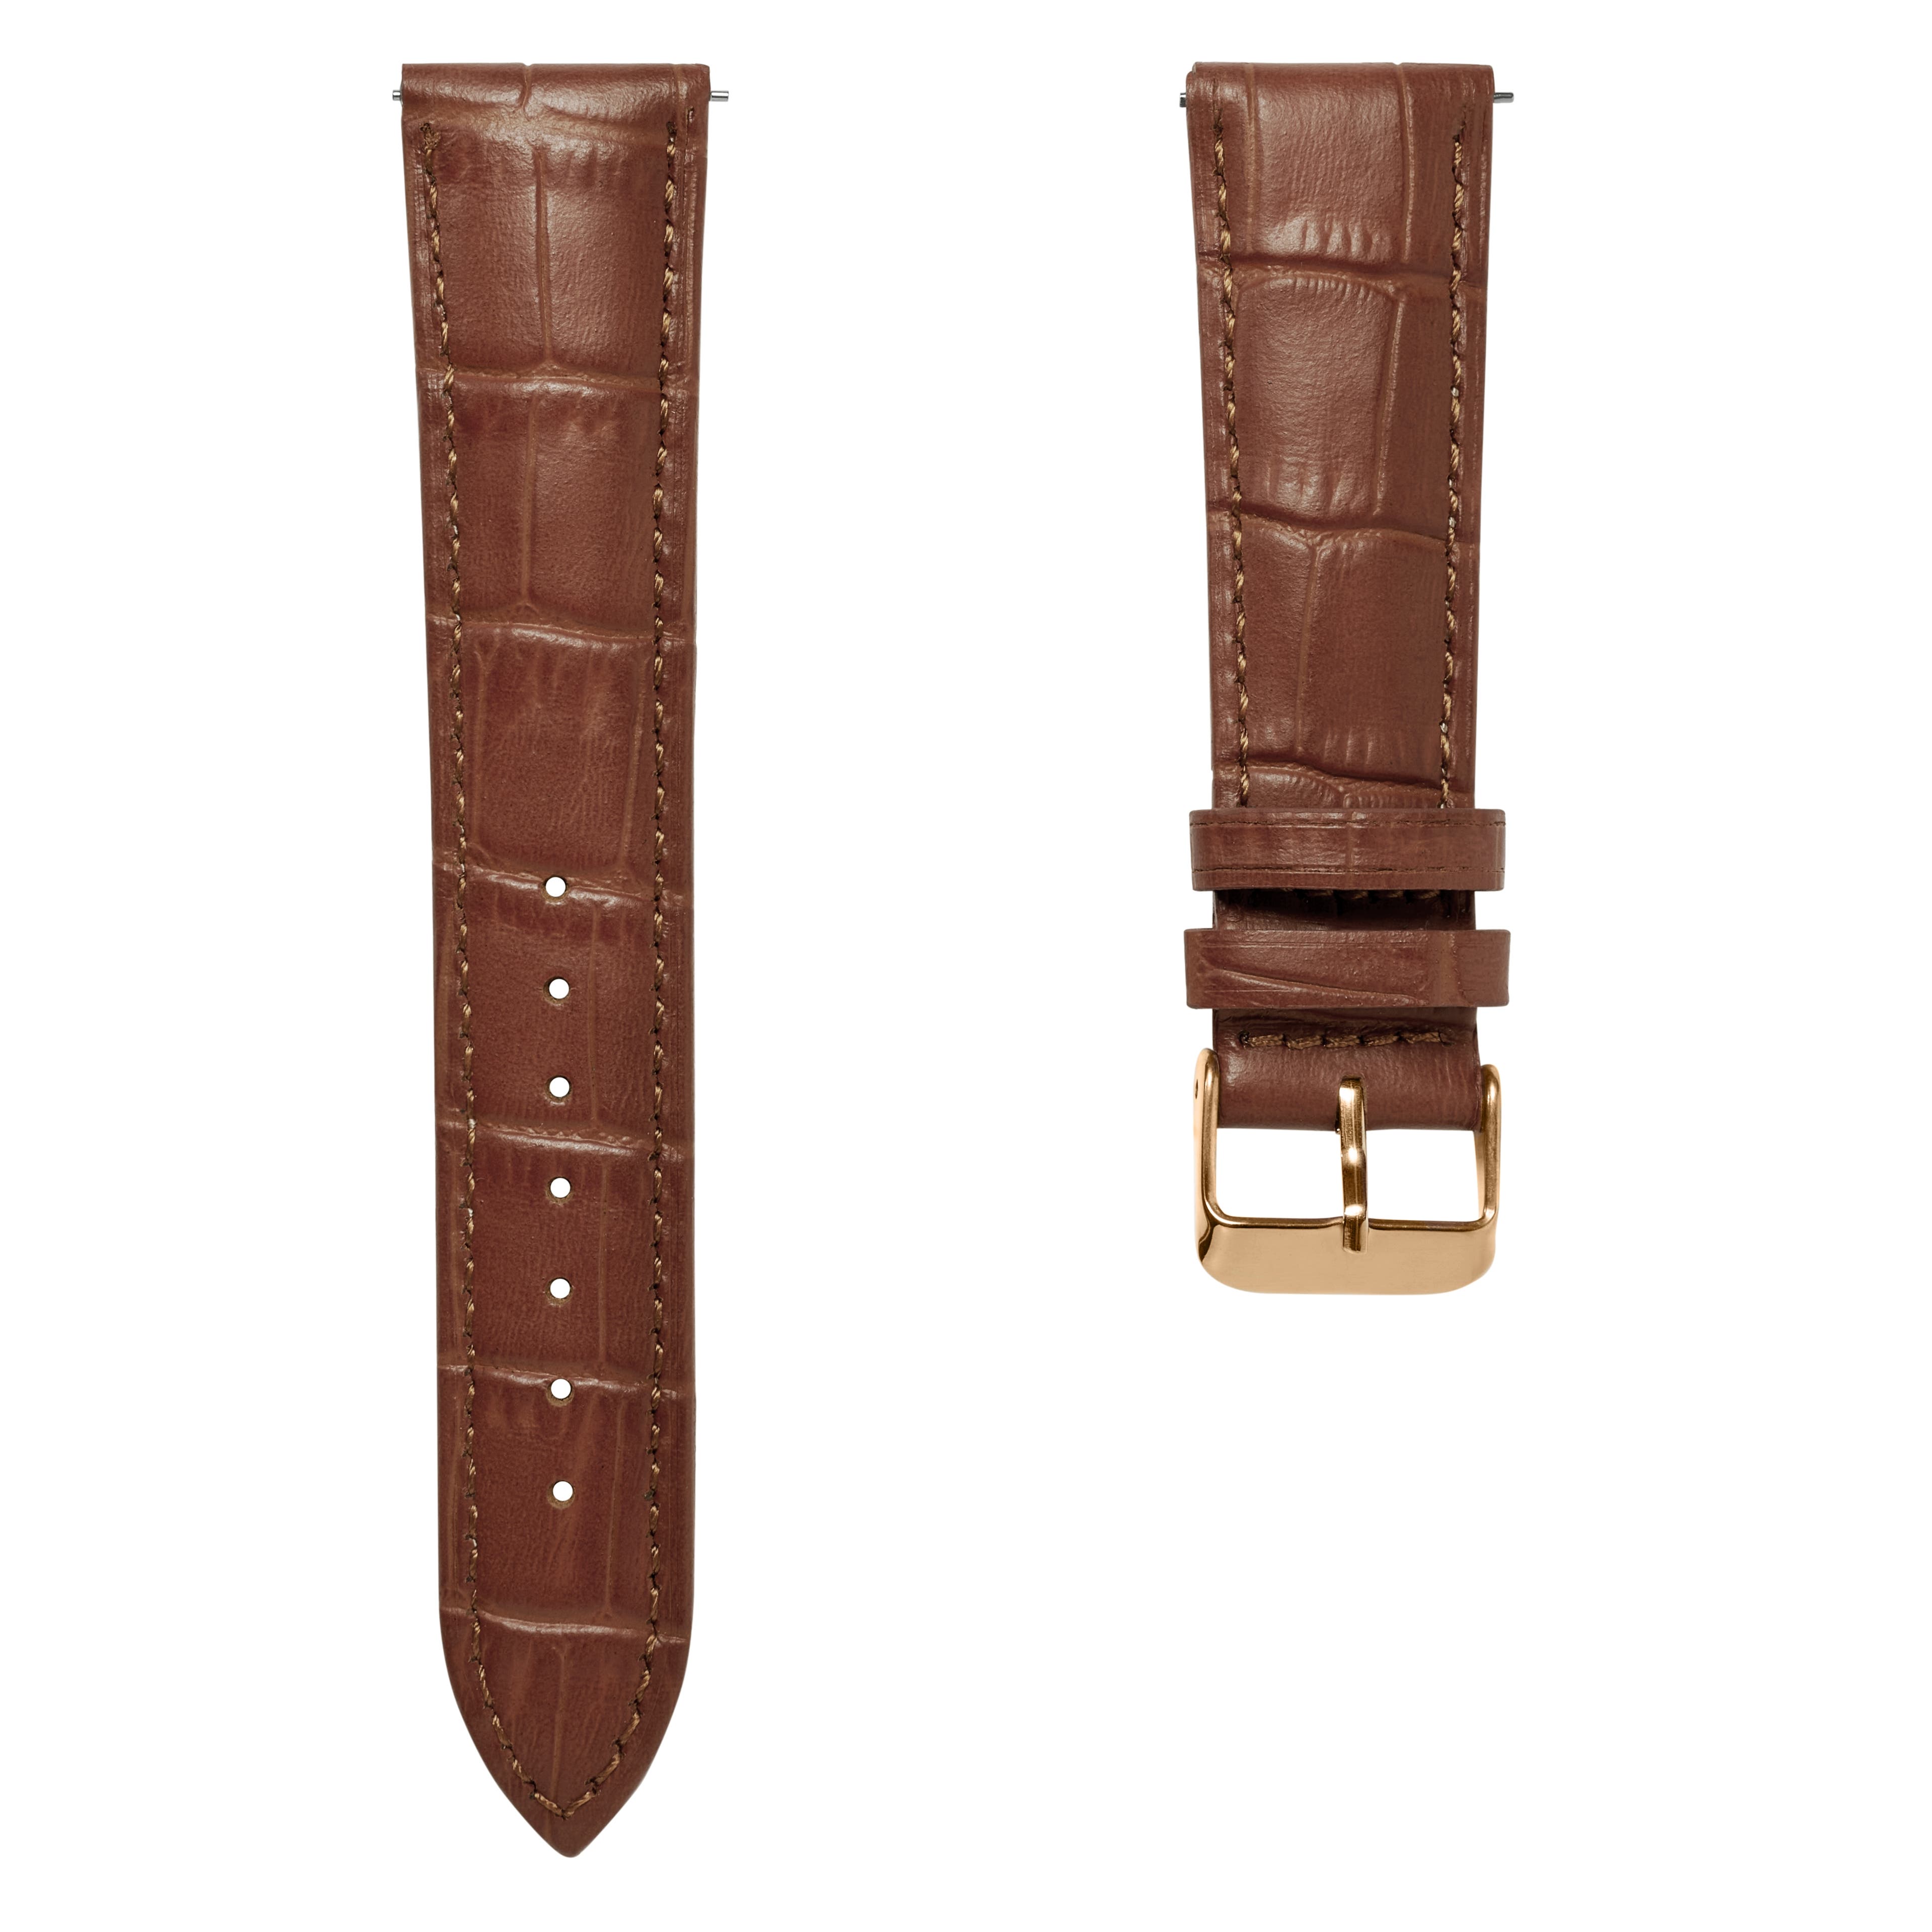 18mm Crocodile-Embossed Tan Leather Watch Strap with Rose Gold-Tone Buckle – Quick Release